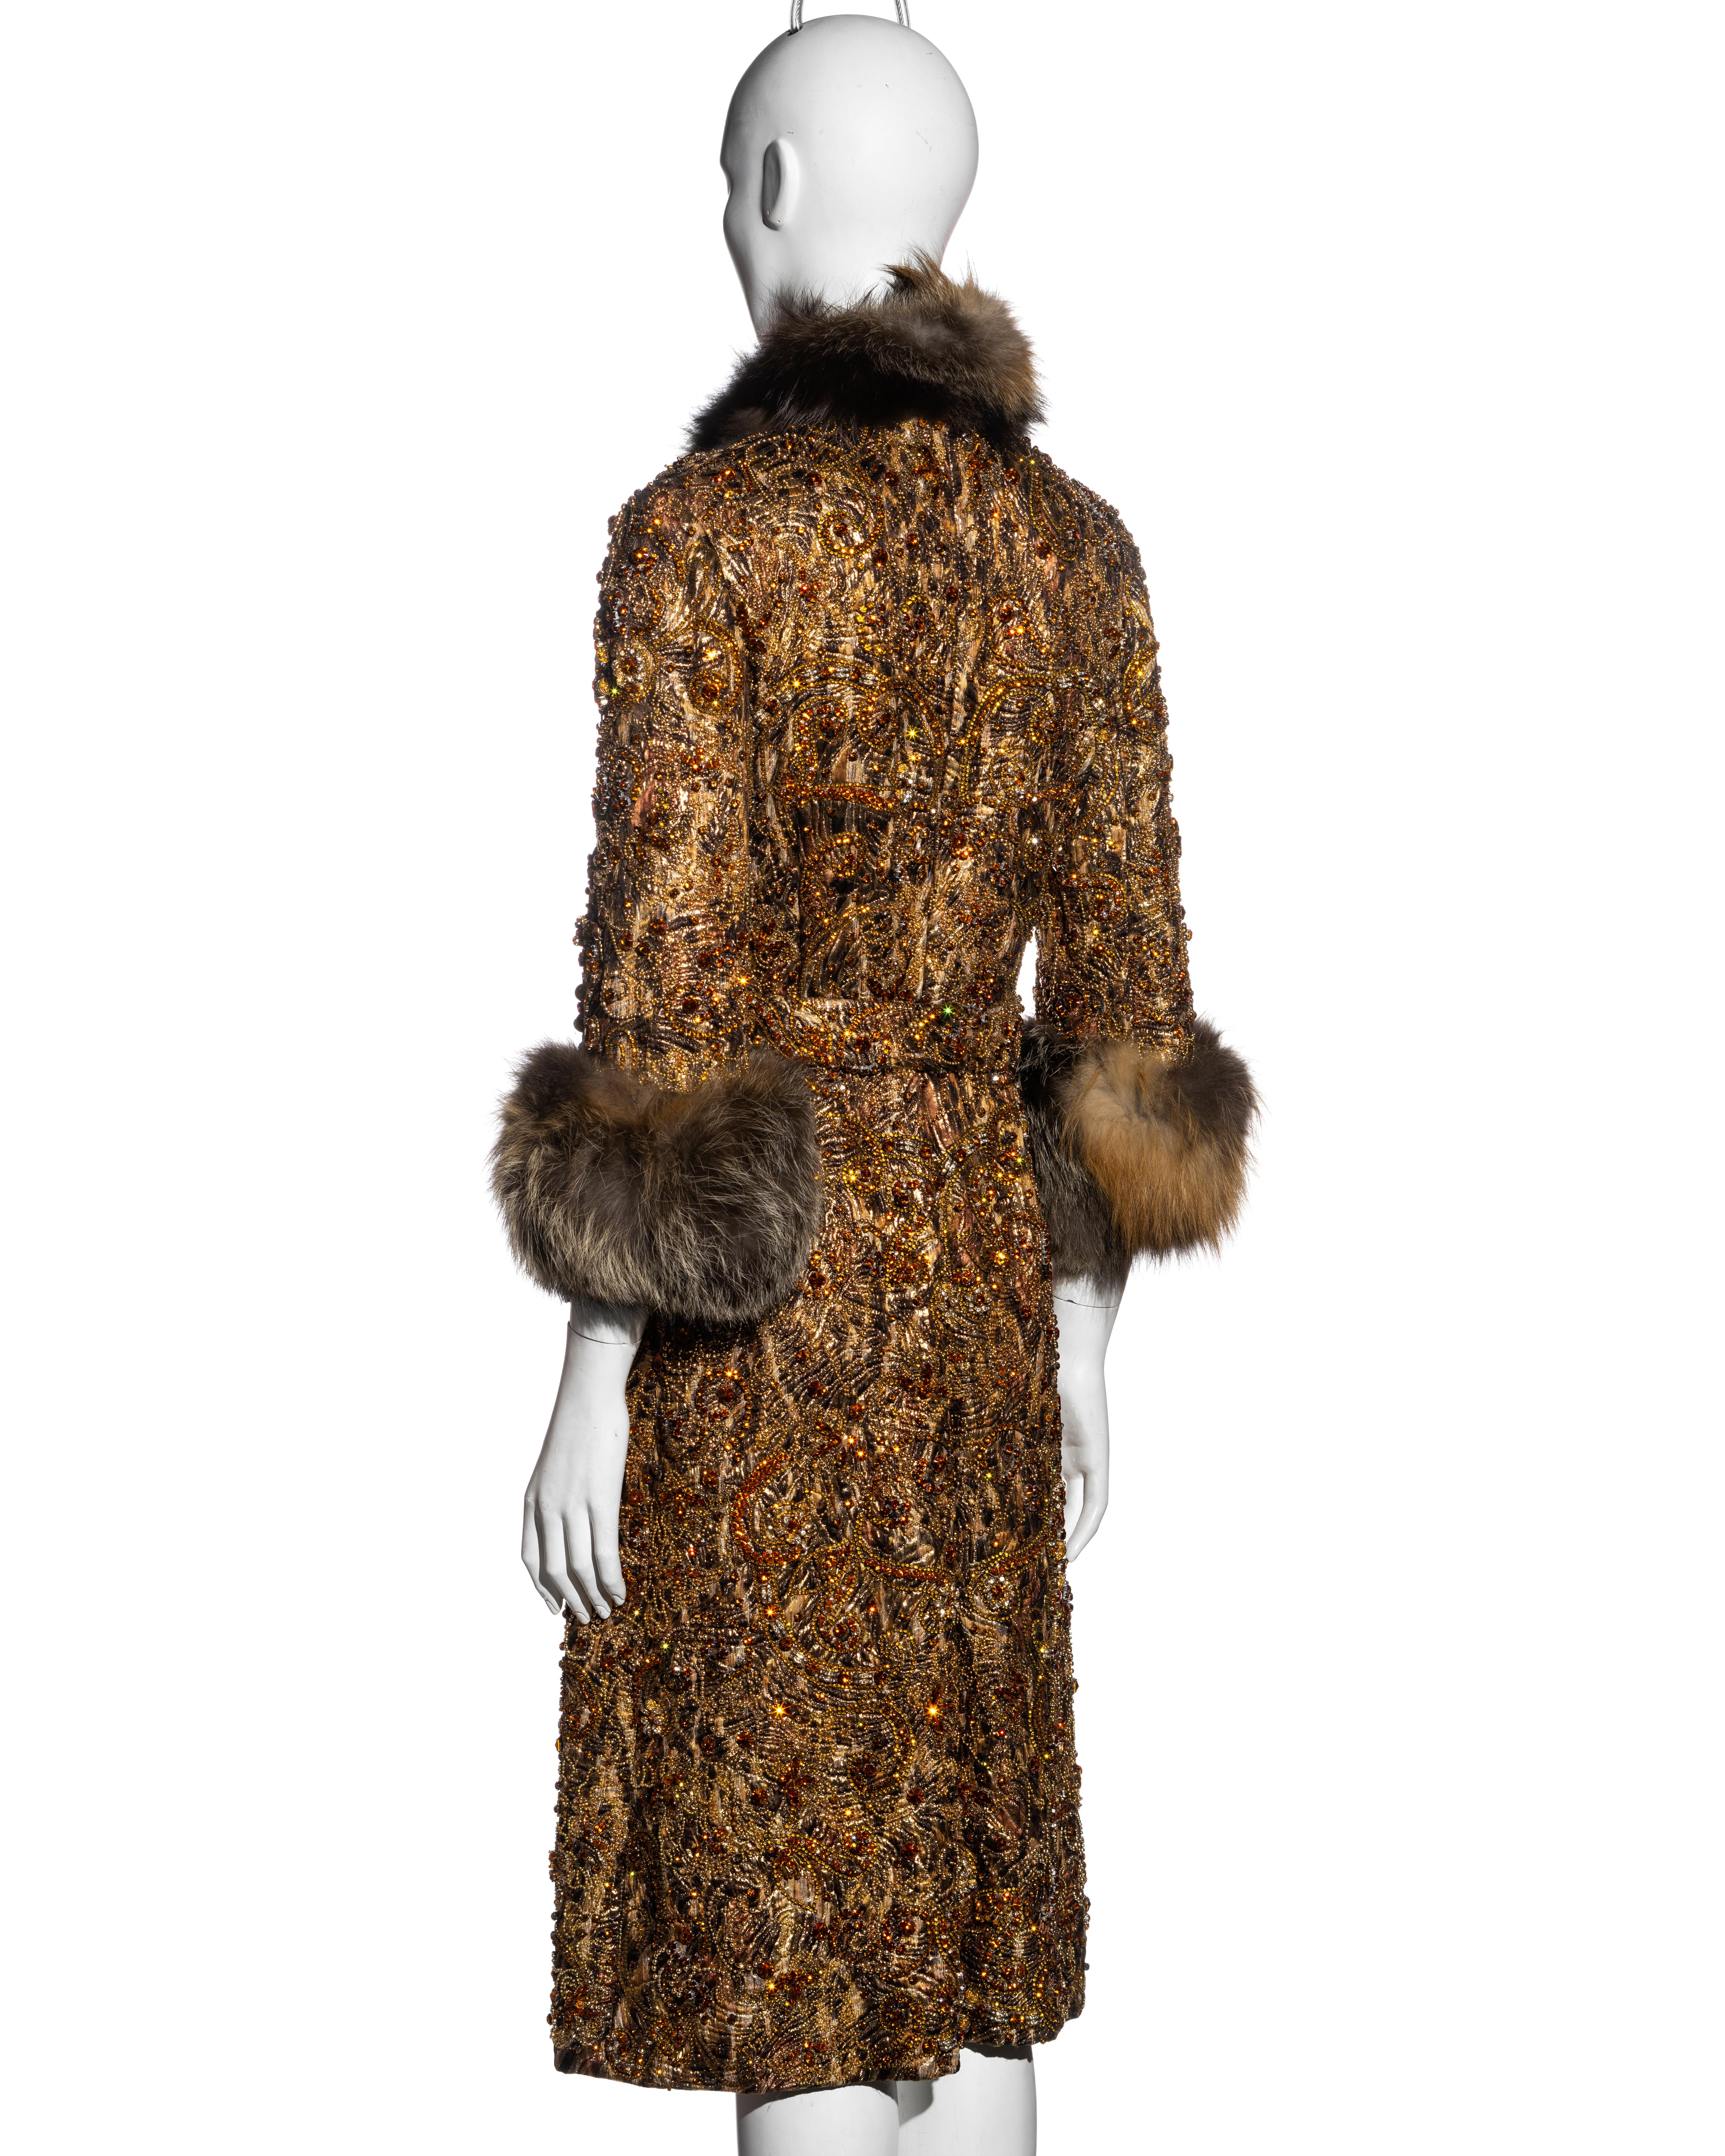 Dolce & Gabbana brocade and fox fur crystal embellished evening coat, fw 2004 For Sale 9